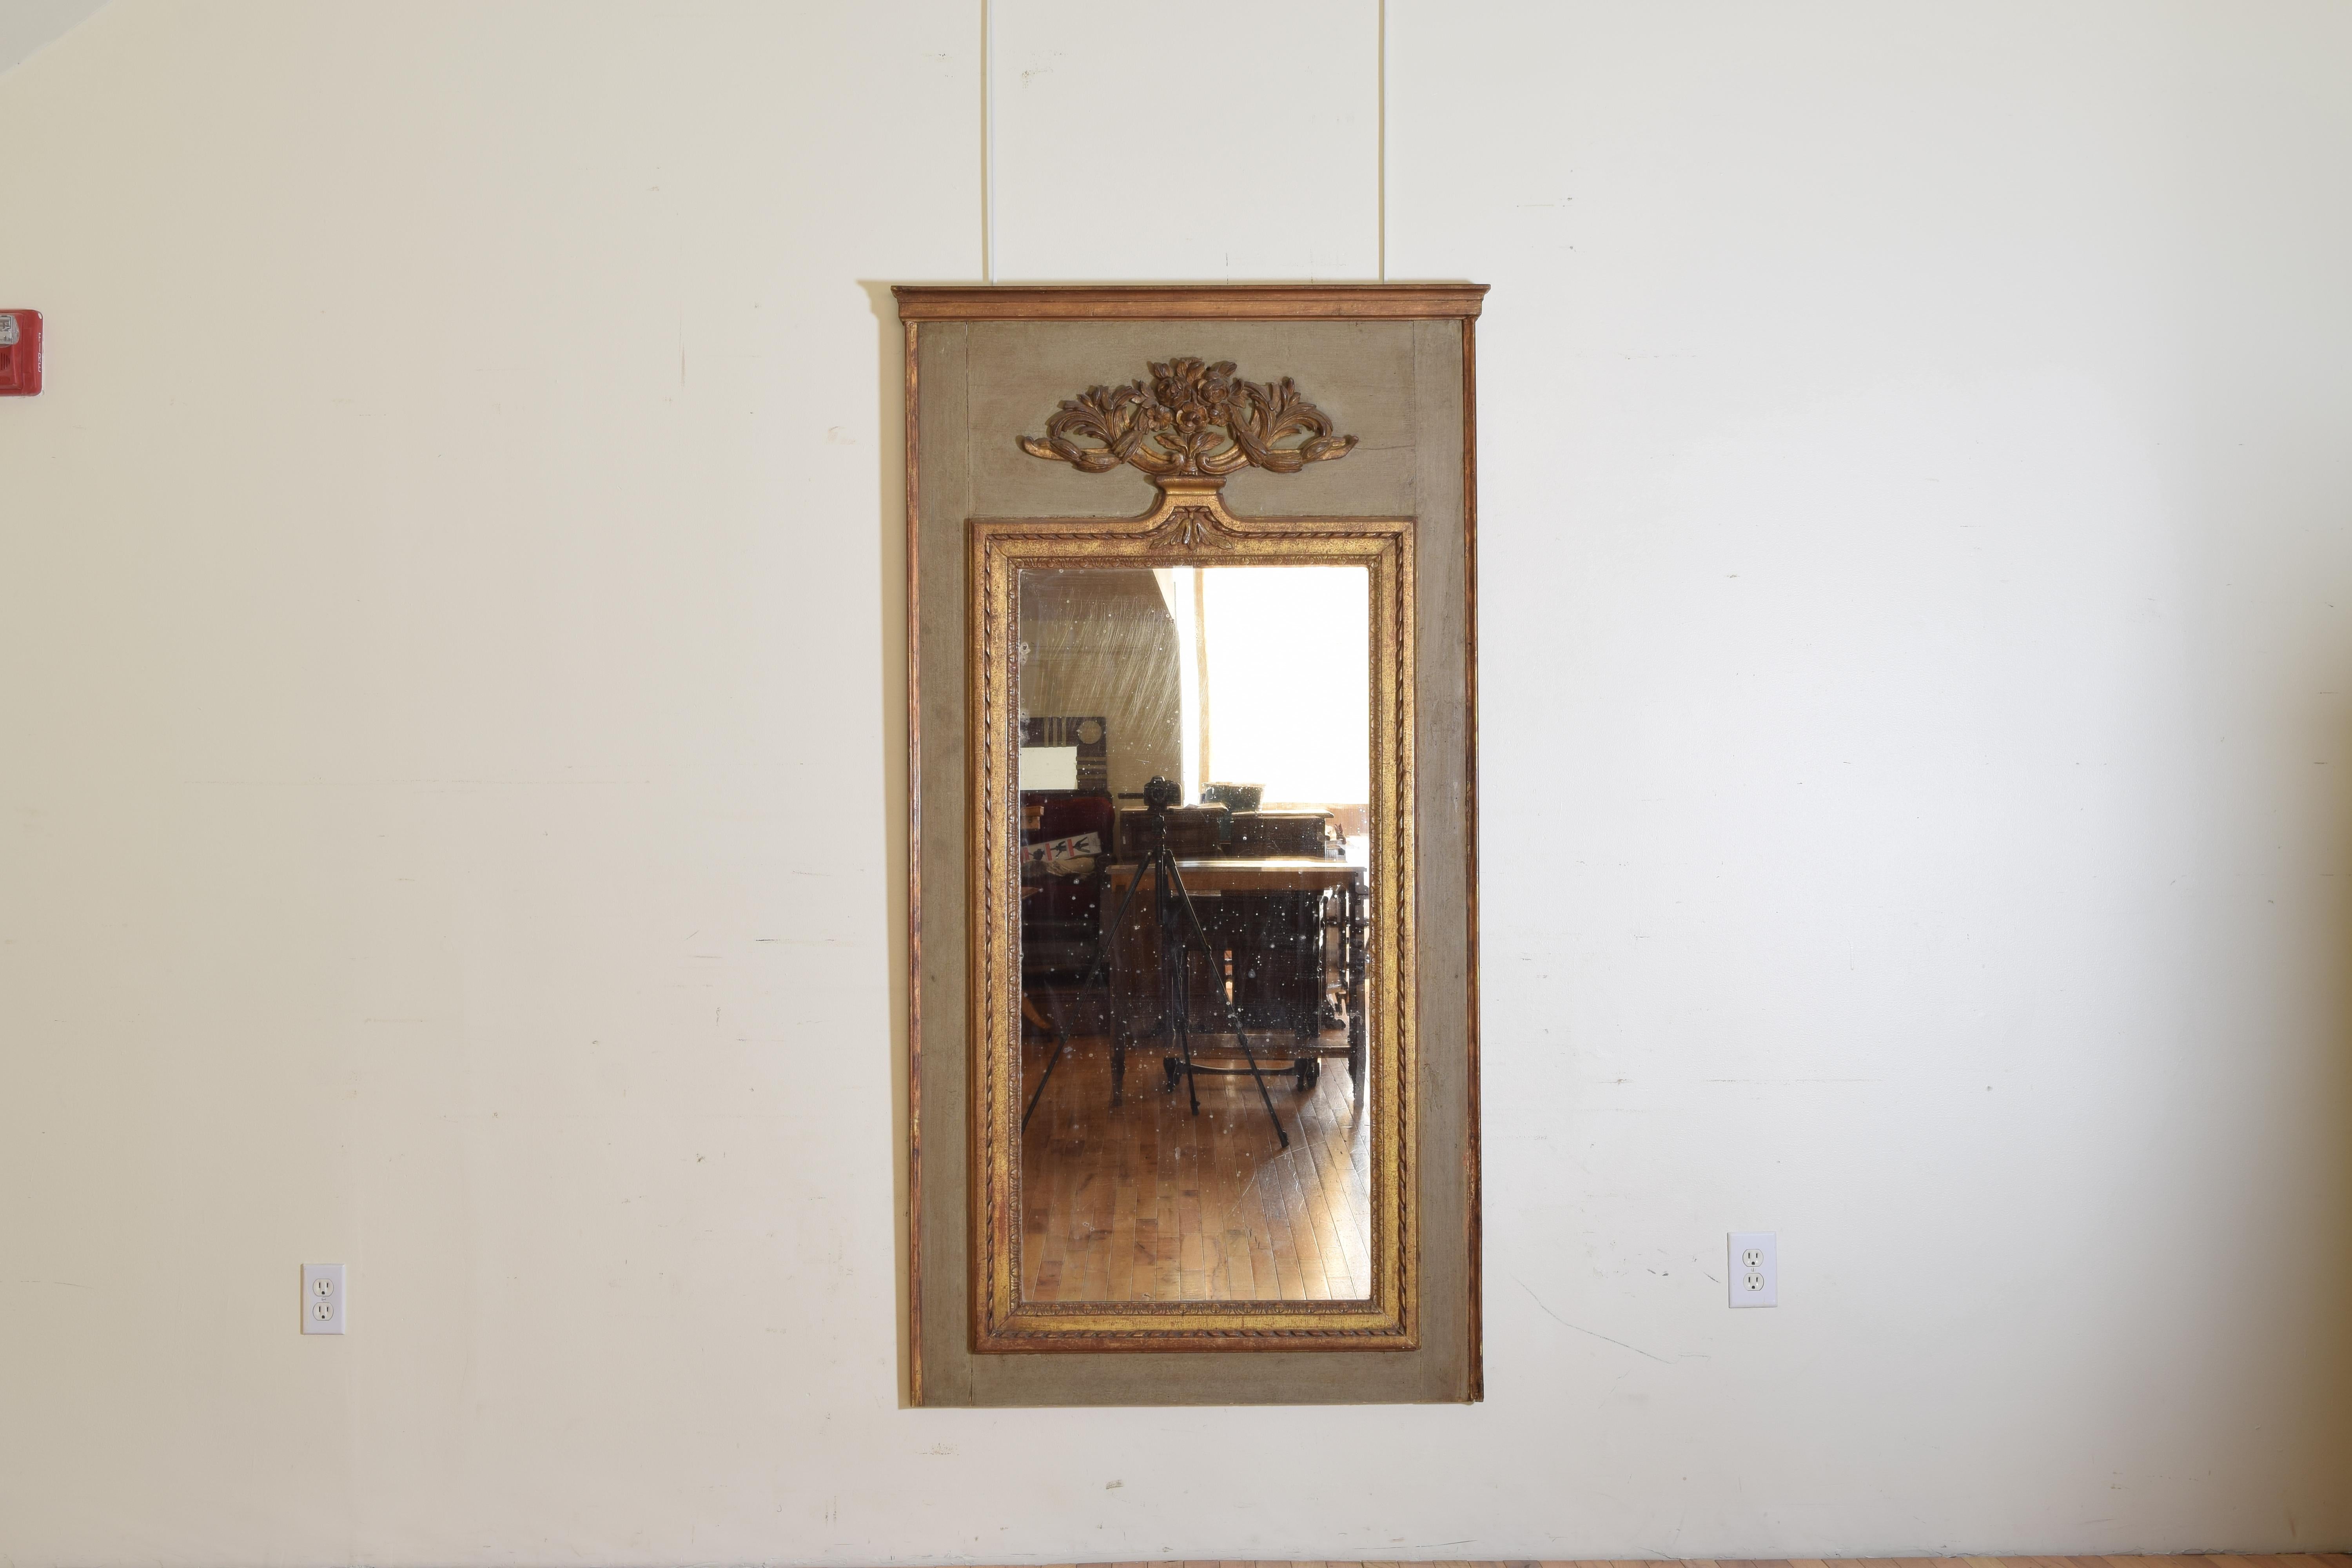 Of rectangular vertical form this mirror has a painted ground with carved giltwood crown and side moldings, the inner section with ribbon carved moldings and an urn shaped upper section issuing leaf forms and floral sprays.